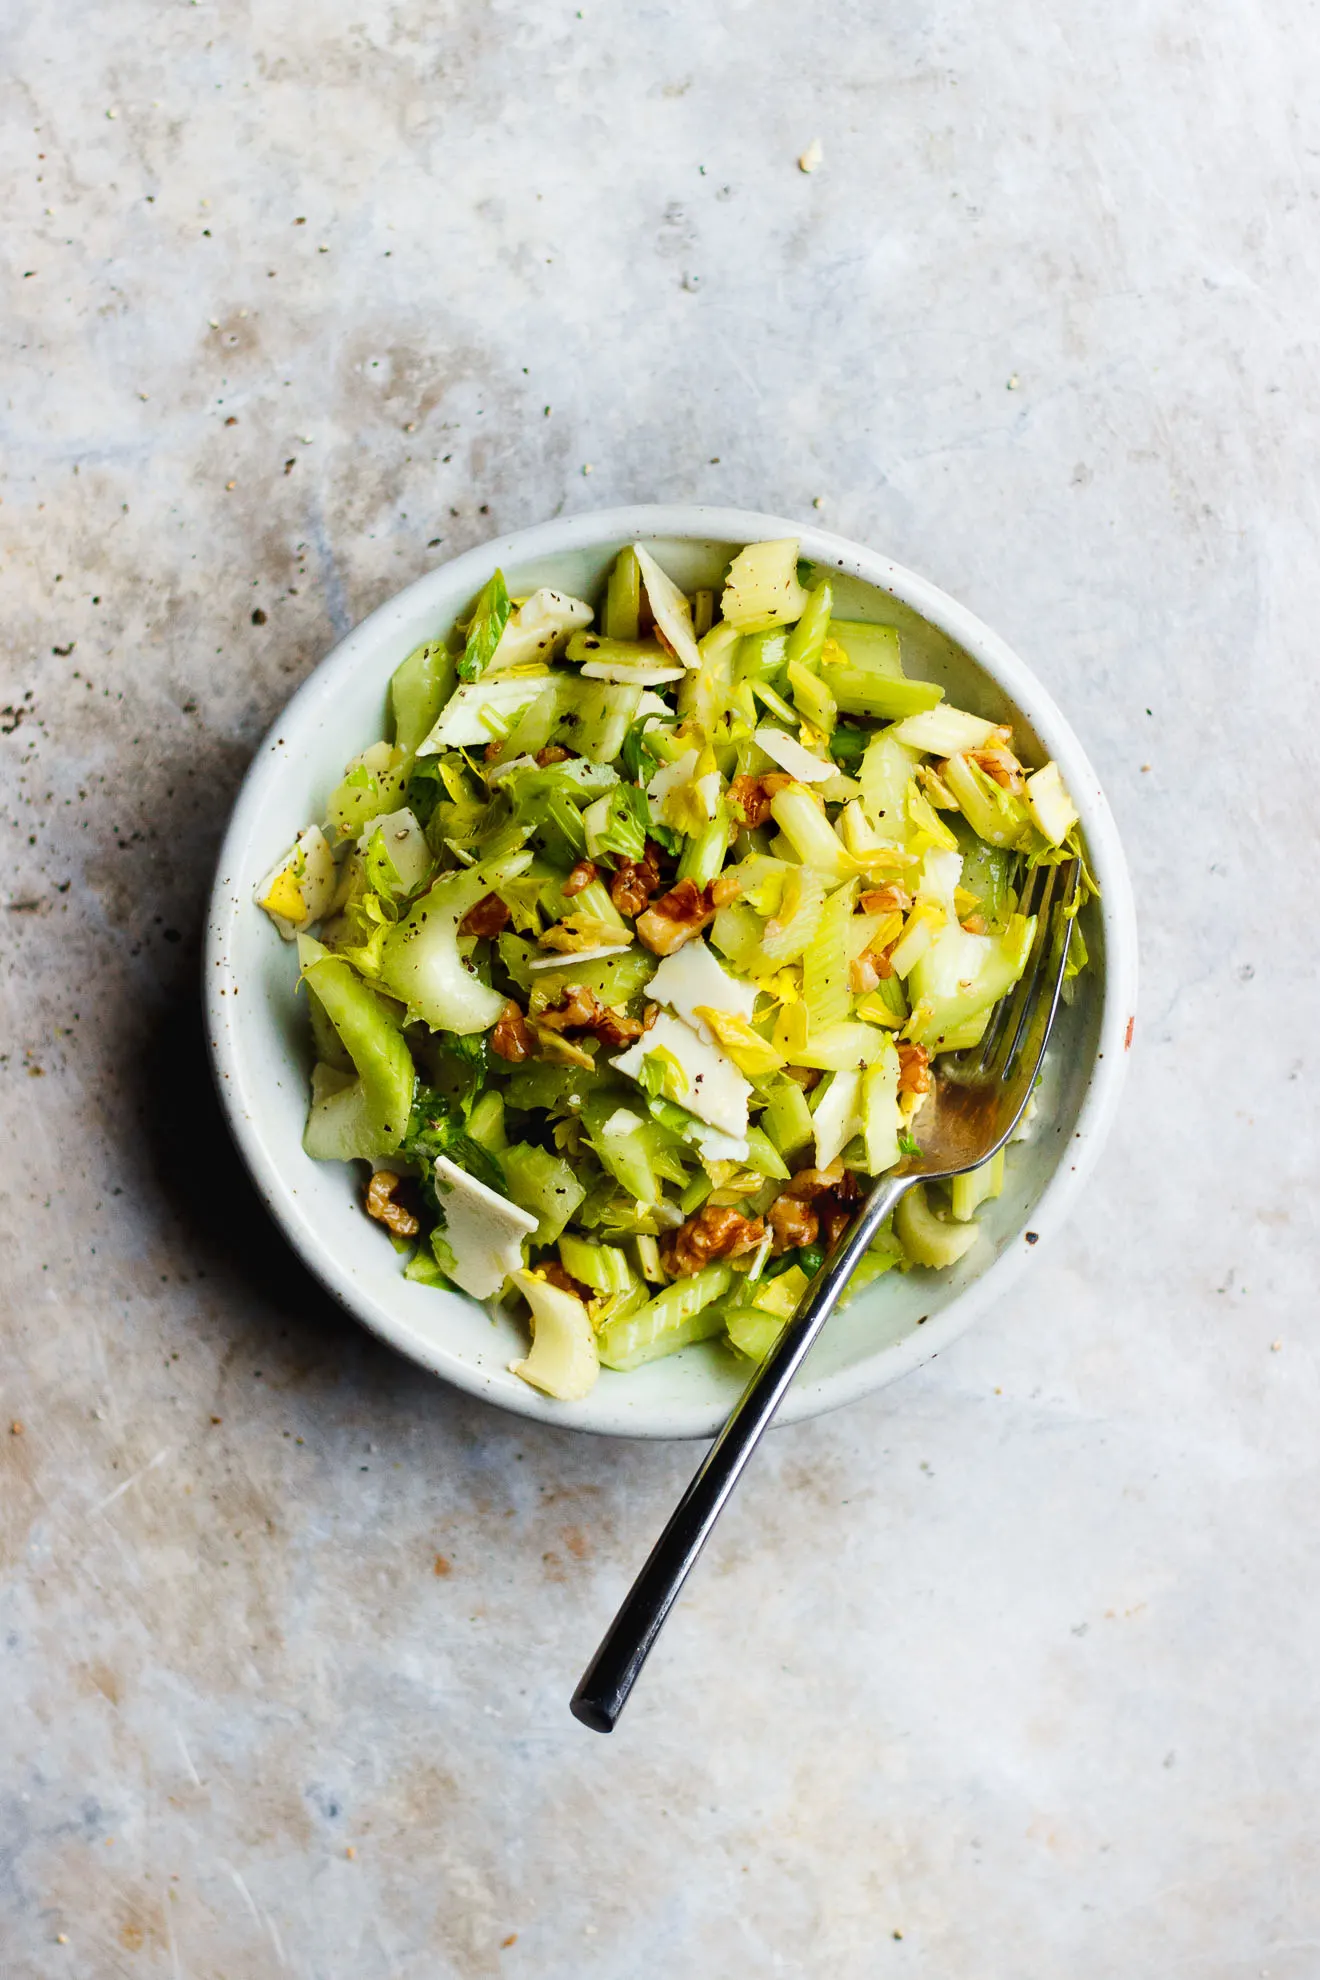 Celery Salad with Parmigiano-Reggiano + Walnuts | A salty, crunchy celery salad with parmigiano-reggiano and walnuts. A classic, three-ingredient celery and parmesan cheese salad.